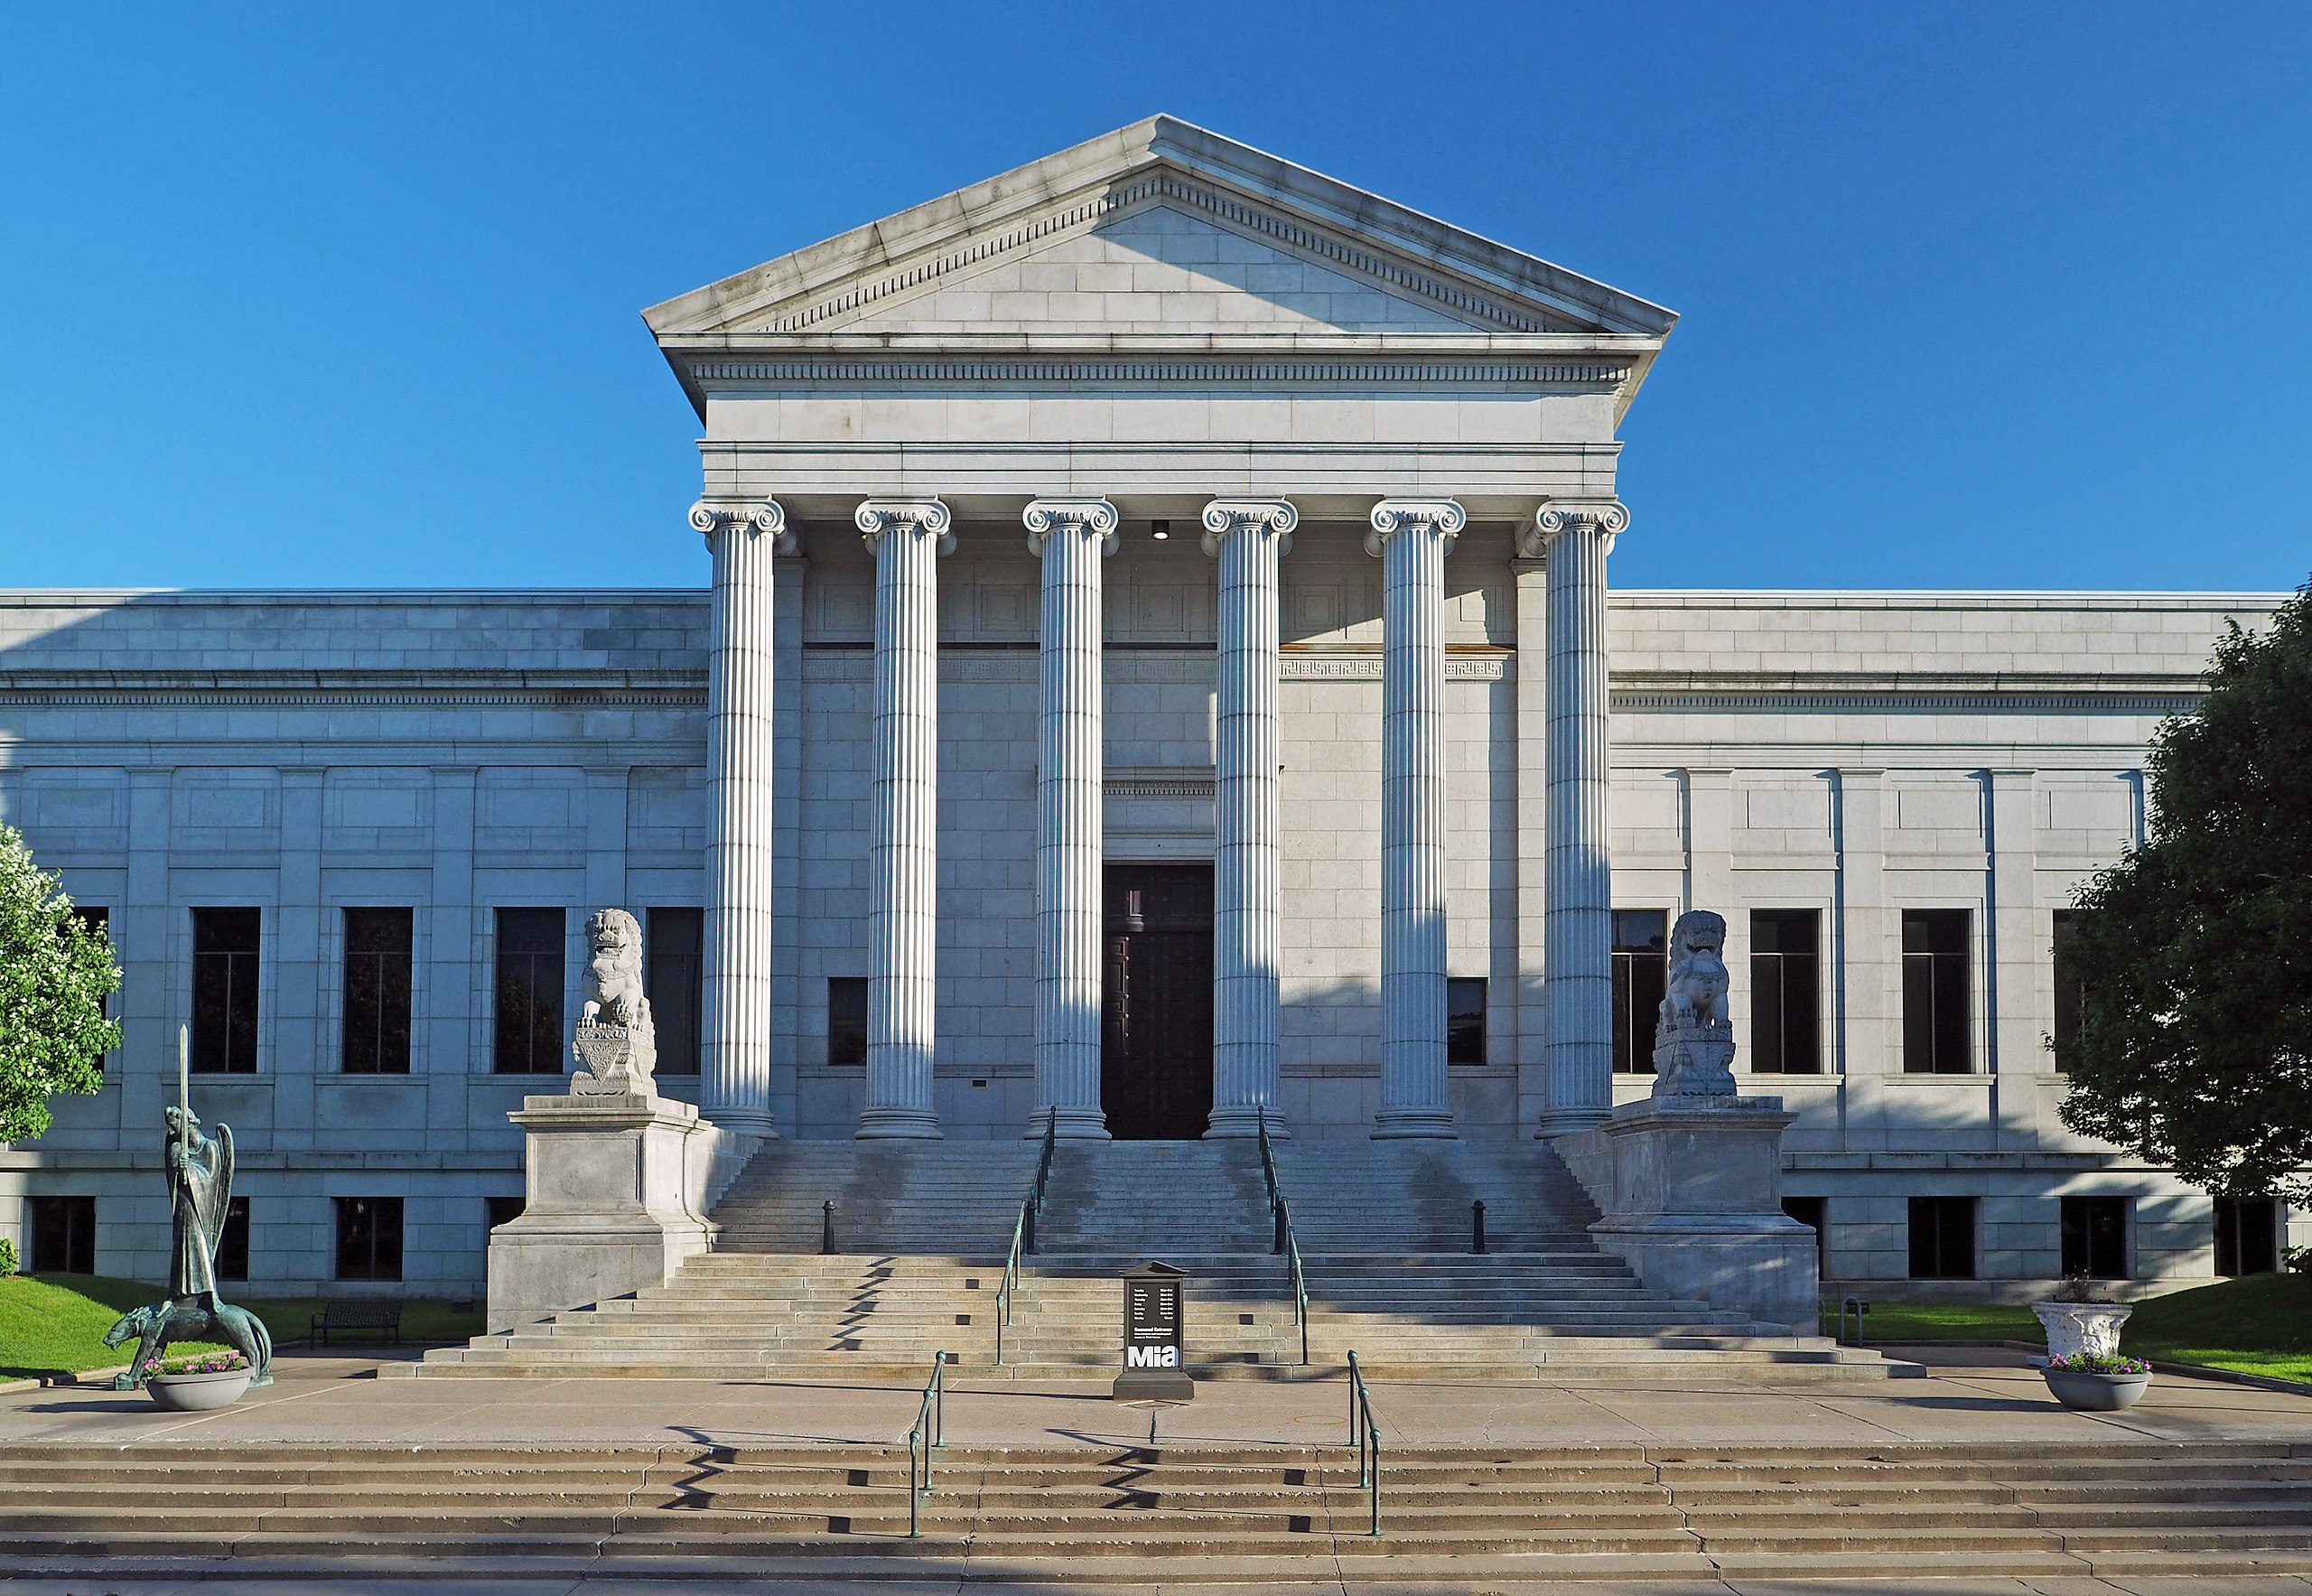 Minneapolis Institute of Art - image by McGheiver on Wikimedia Commons